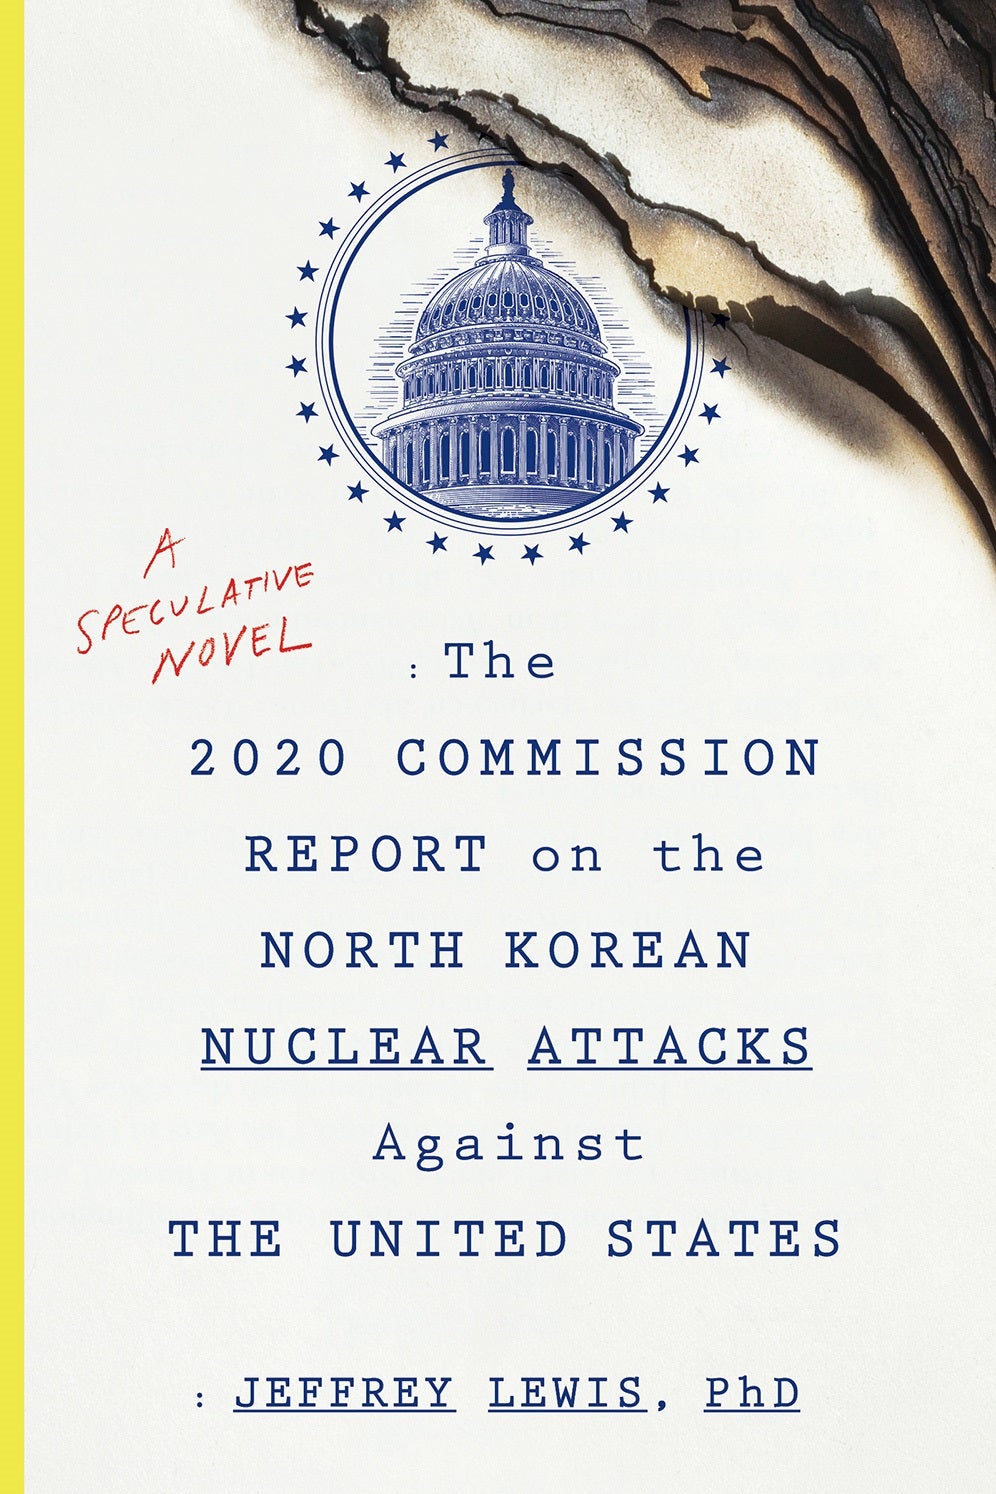 Book cover for The 2020 Commission Report on the North Korean Nuclear Attacks Against the United States.